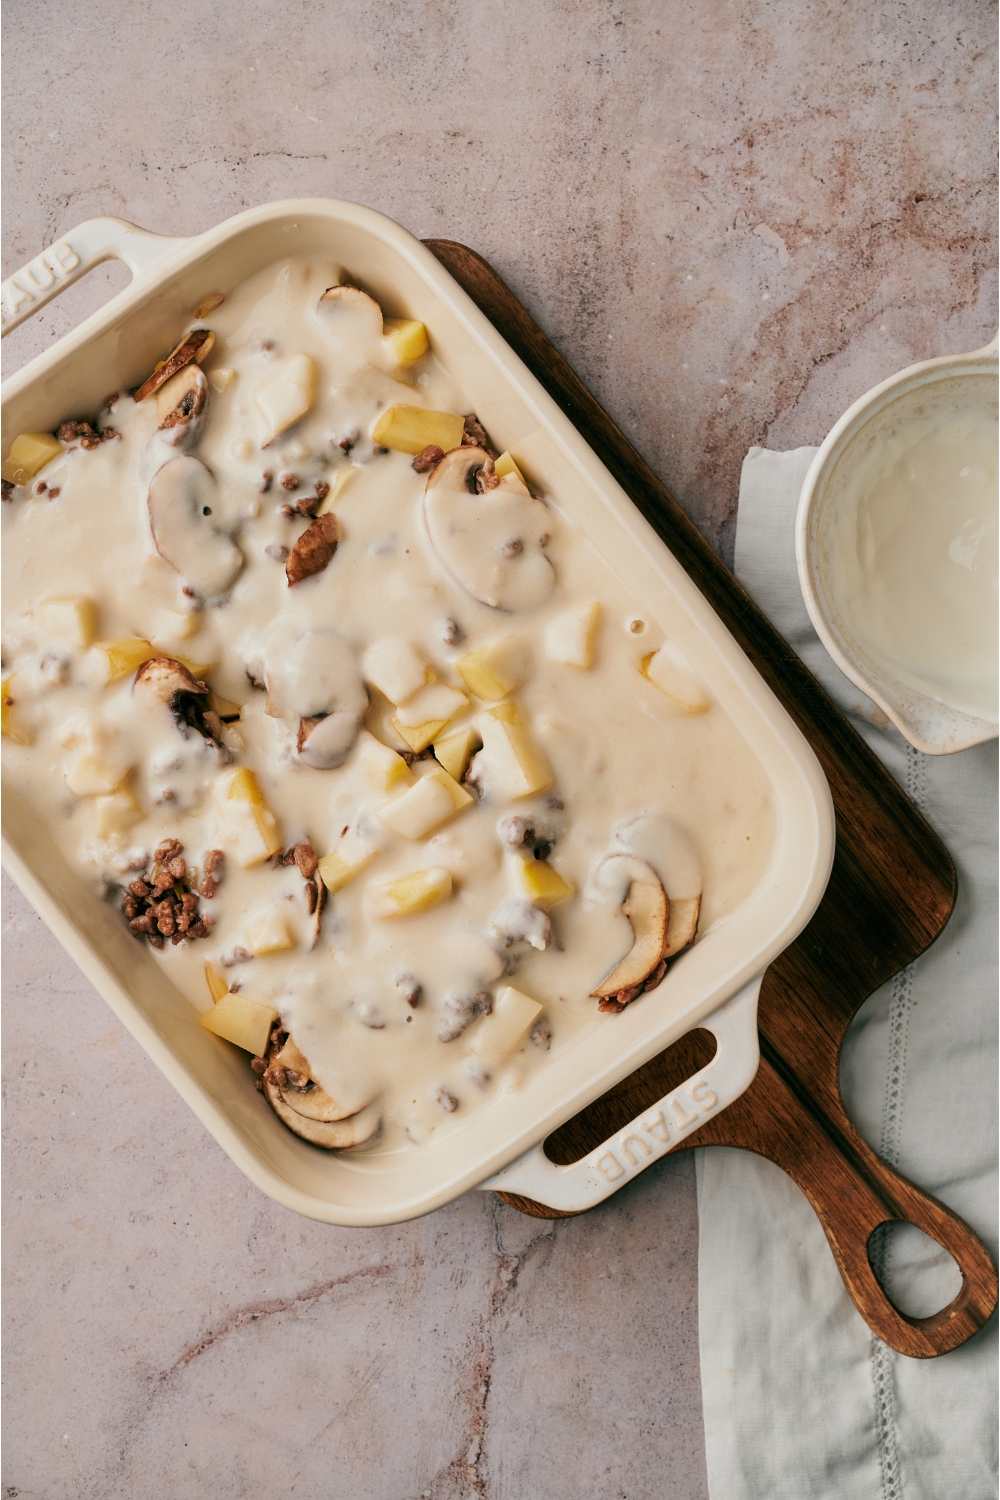 A white baking dish filled with cooked ground beef, mushrooms, and potatoes smothered in a white sauce.